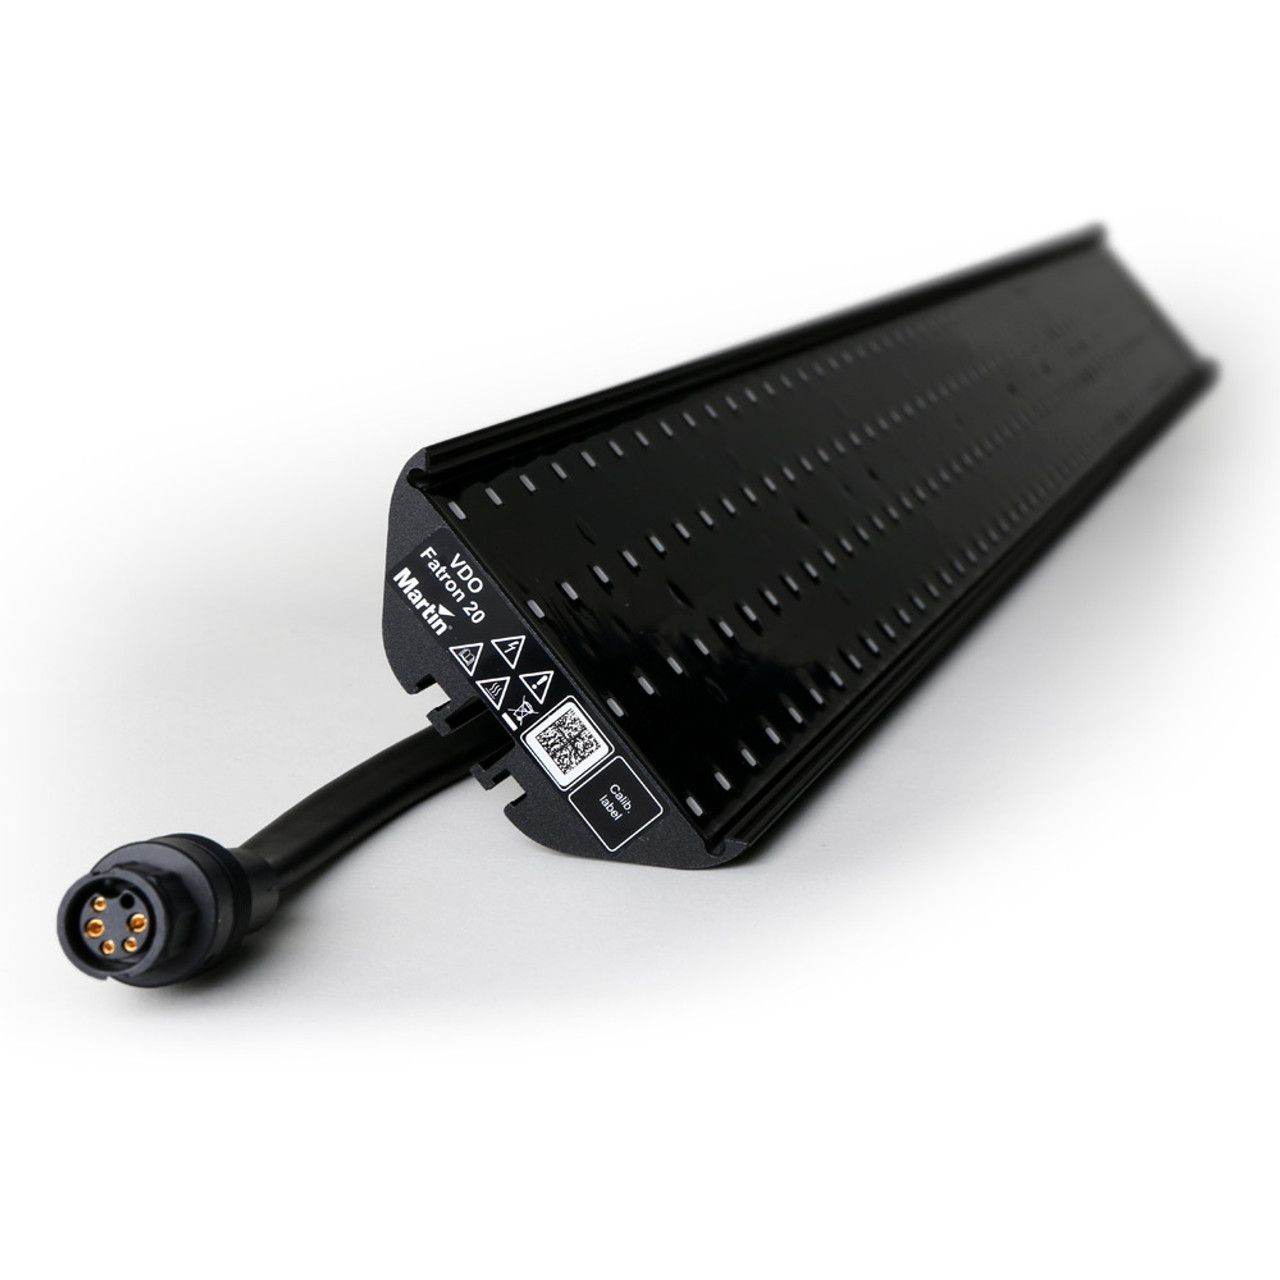 Martin Lighting VDO Fatron 20 LED Video Blade With 20mm Pixel Pitch (90357692HU-)